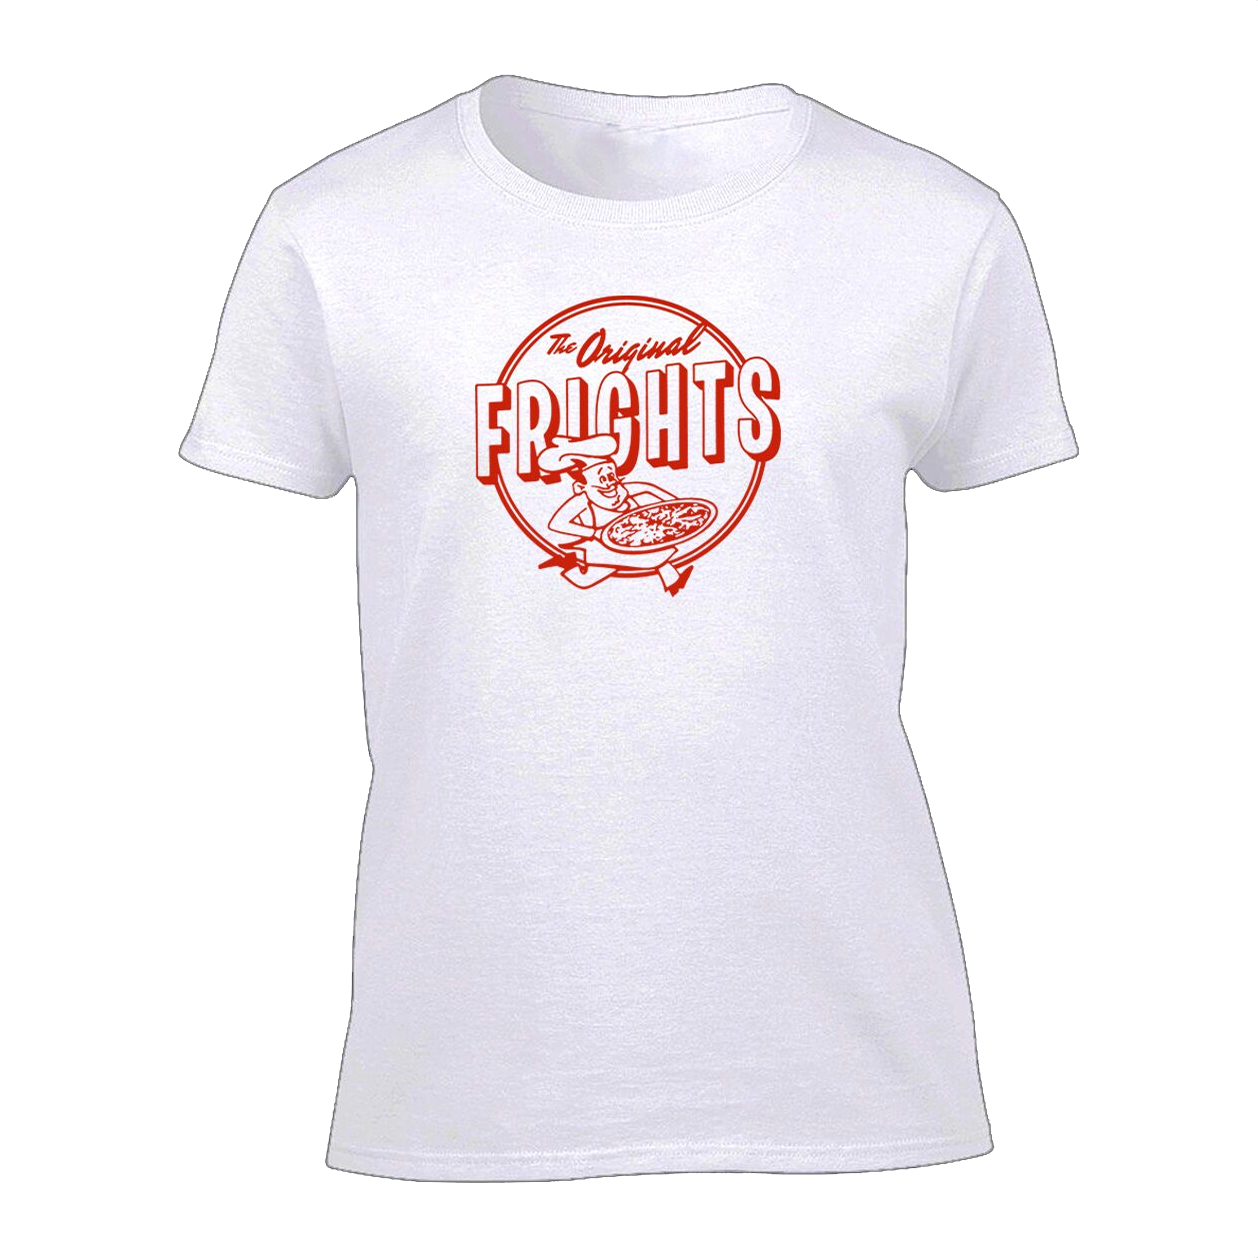 The Frights - The Original Frights White Girls T-Shirt